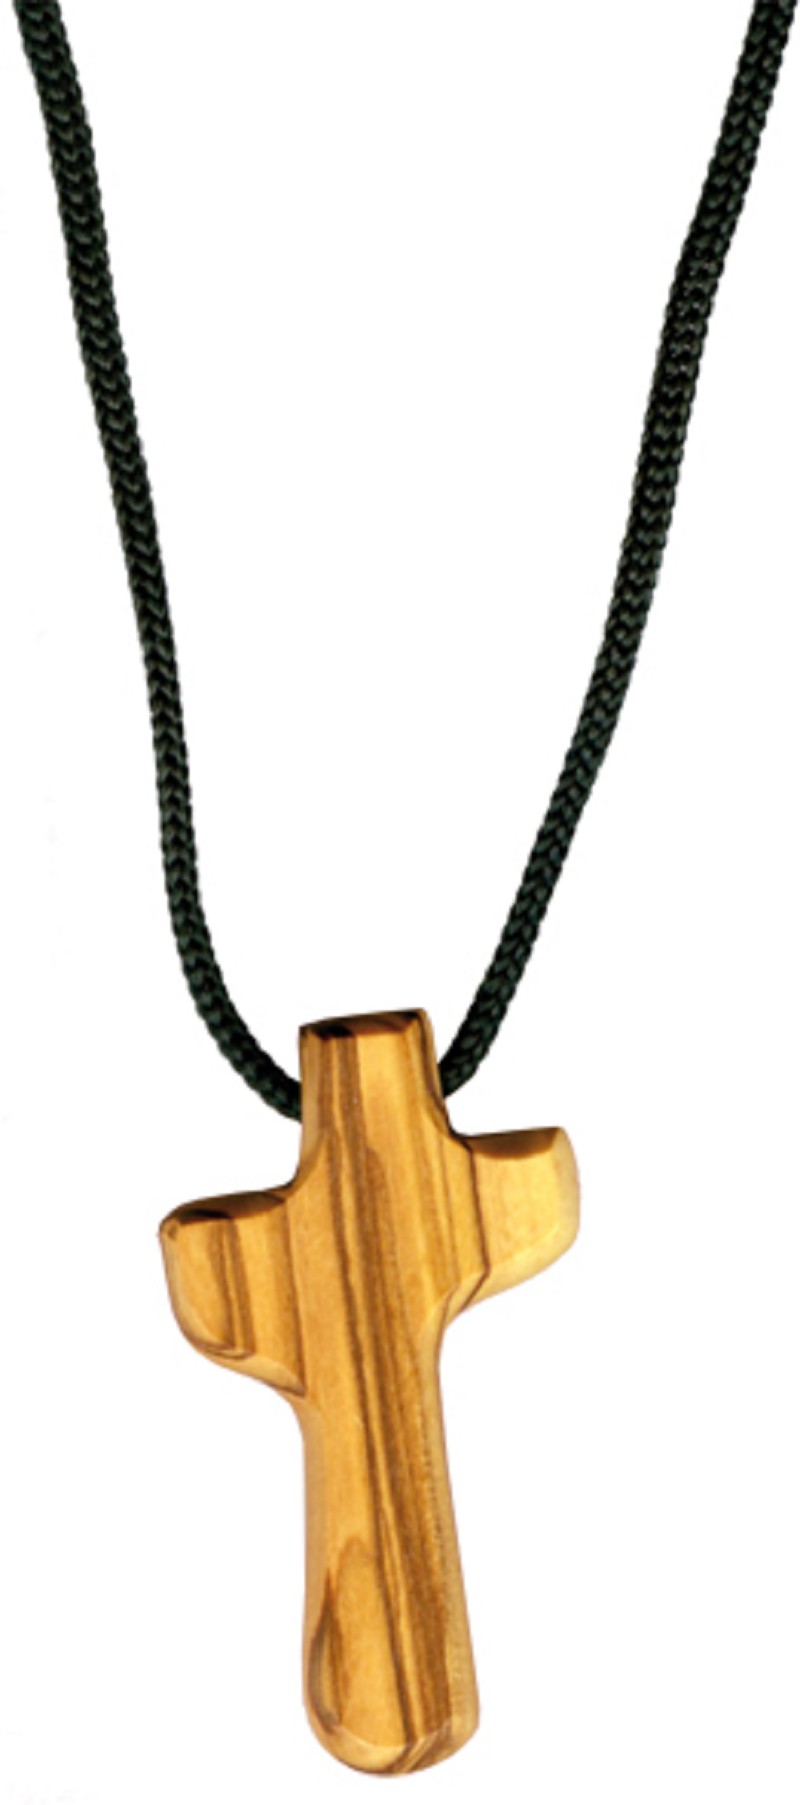 Cross Pendant made of Olive Wood with Cord